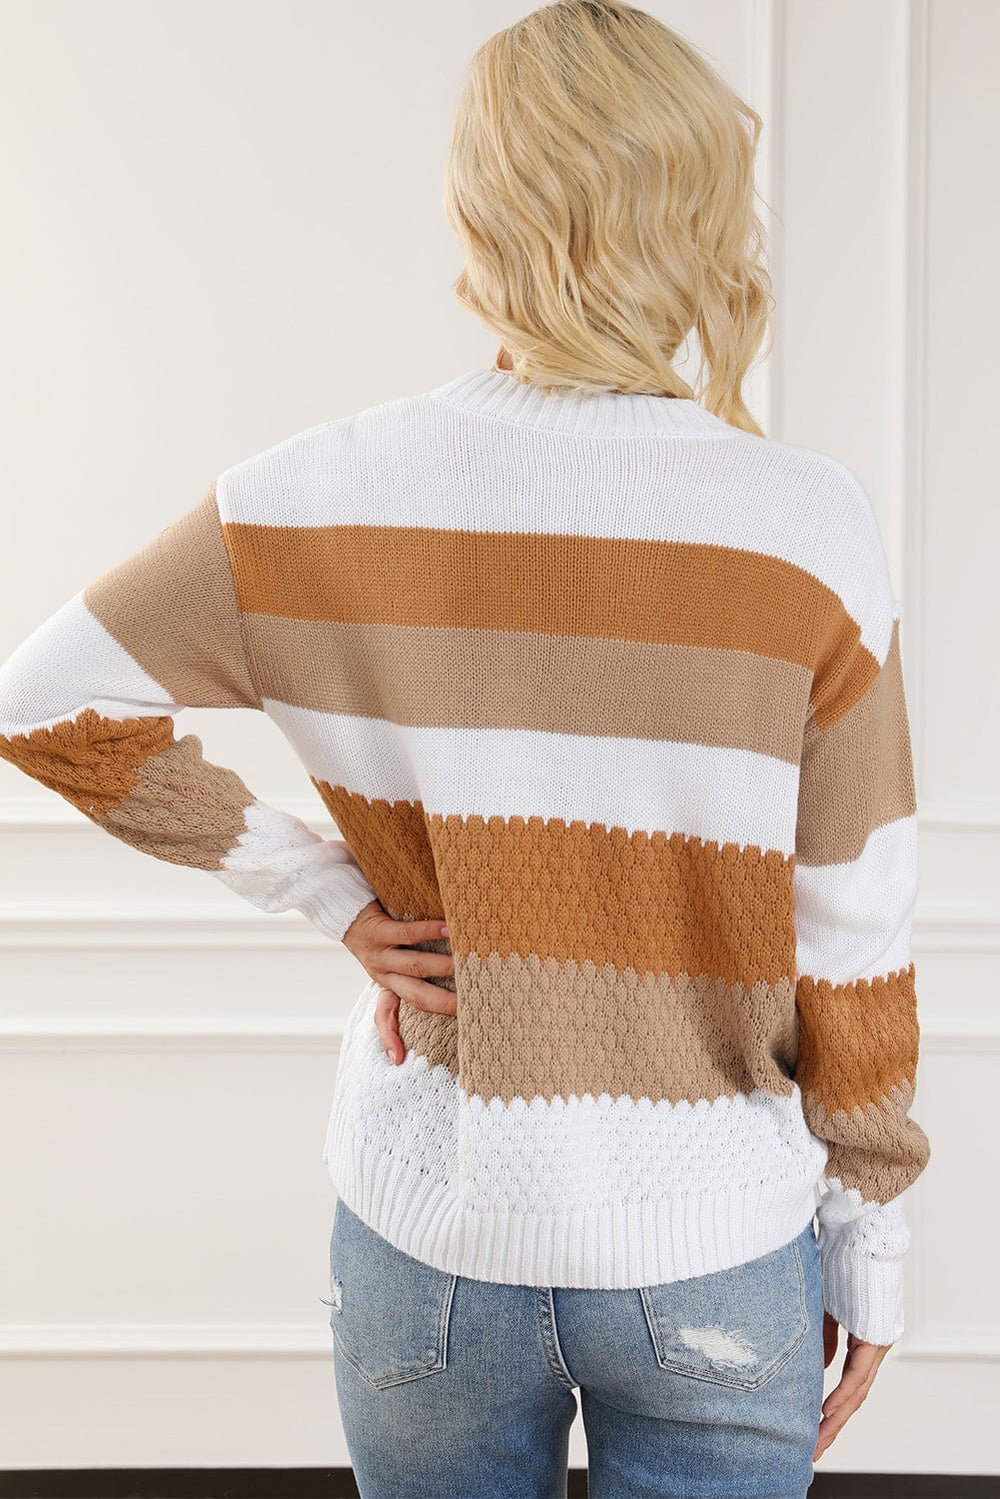 The802Gypsy  Tops Chestnut Striped Cable Knit Drop Shoulder Sweater